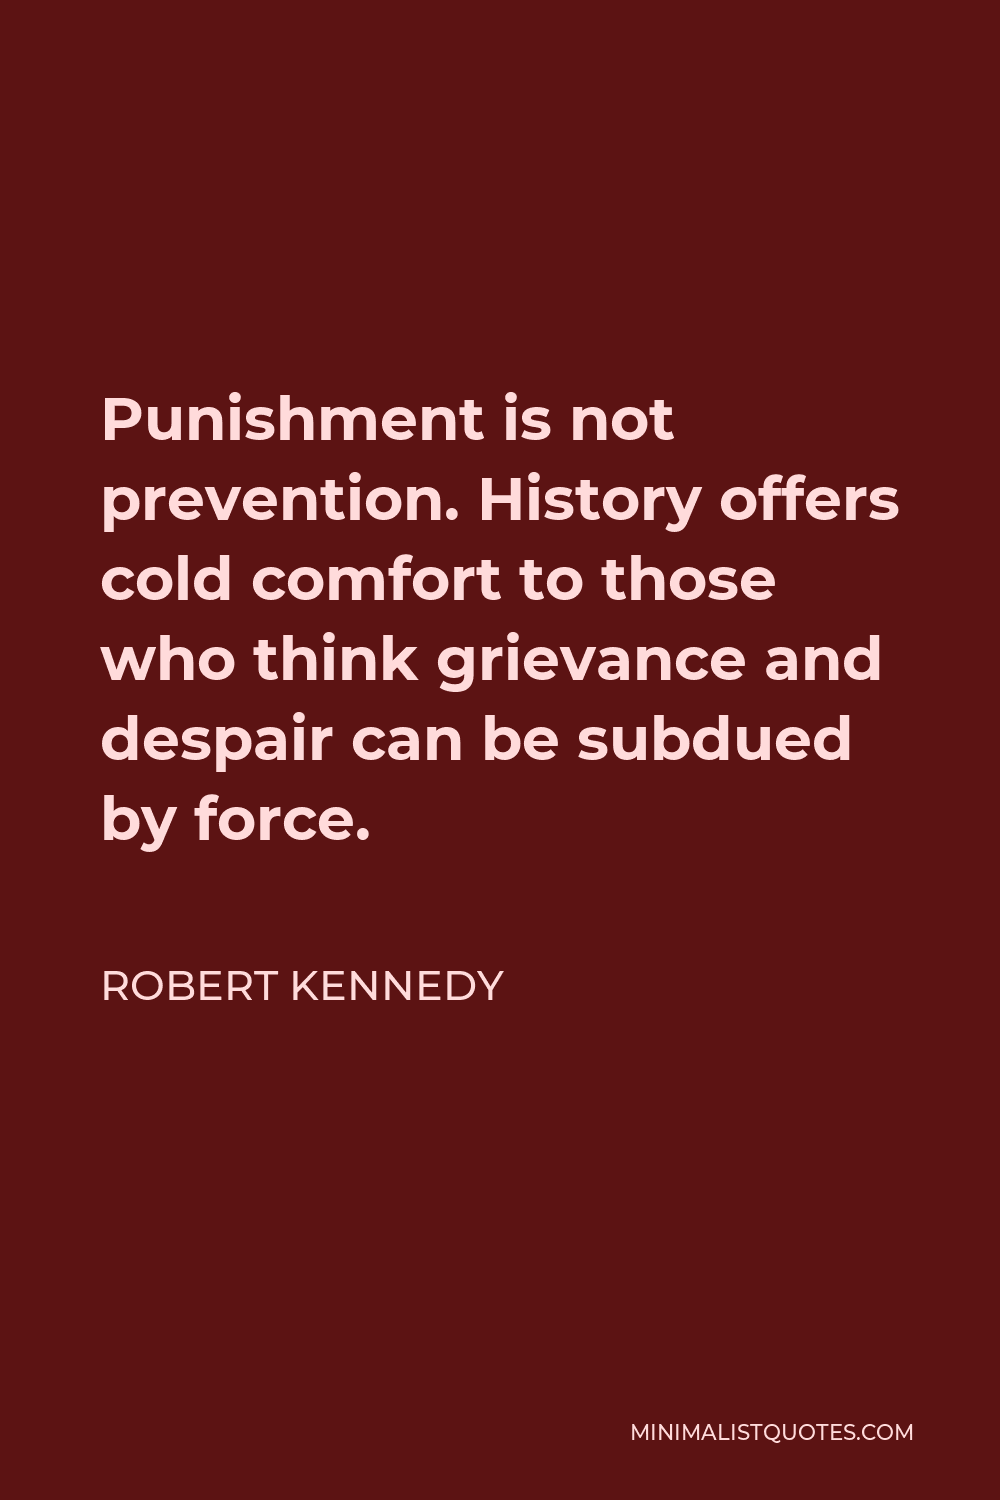 Robert Kennedy Quote - Punishment is not prevention. History offers cold comfort to those who think grievance and despair can be subdued by force.